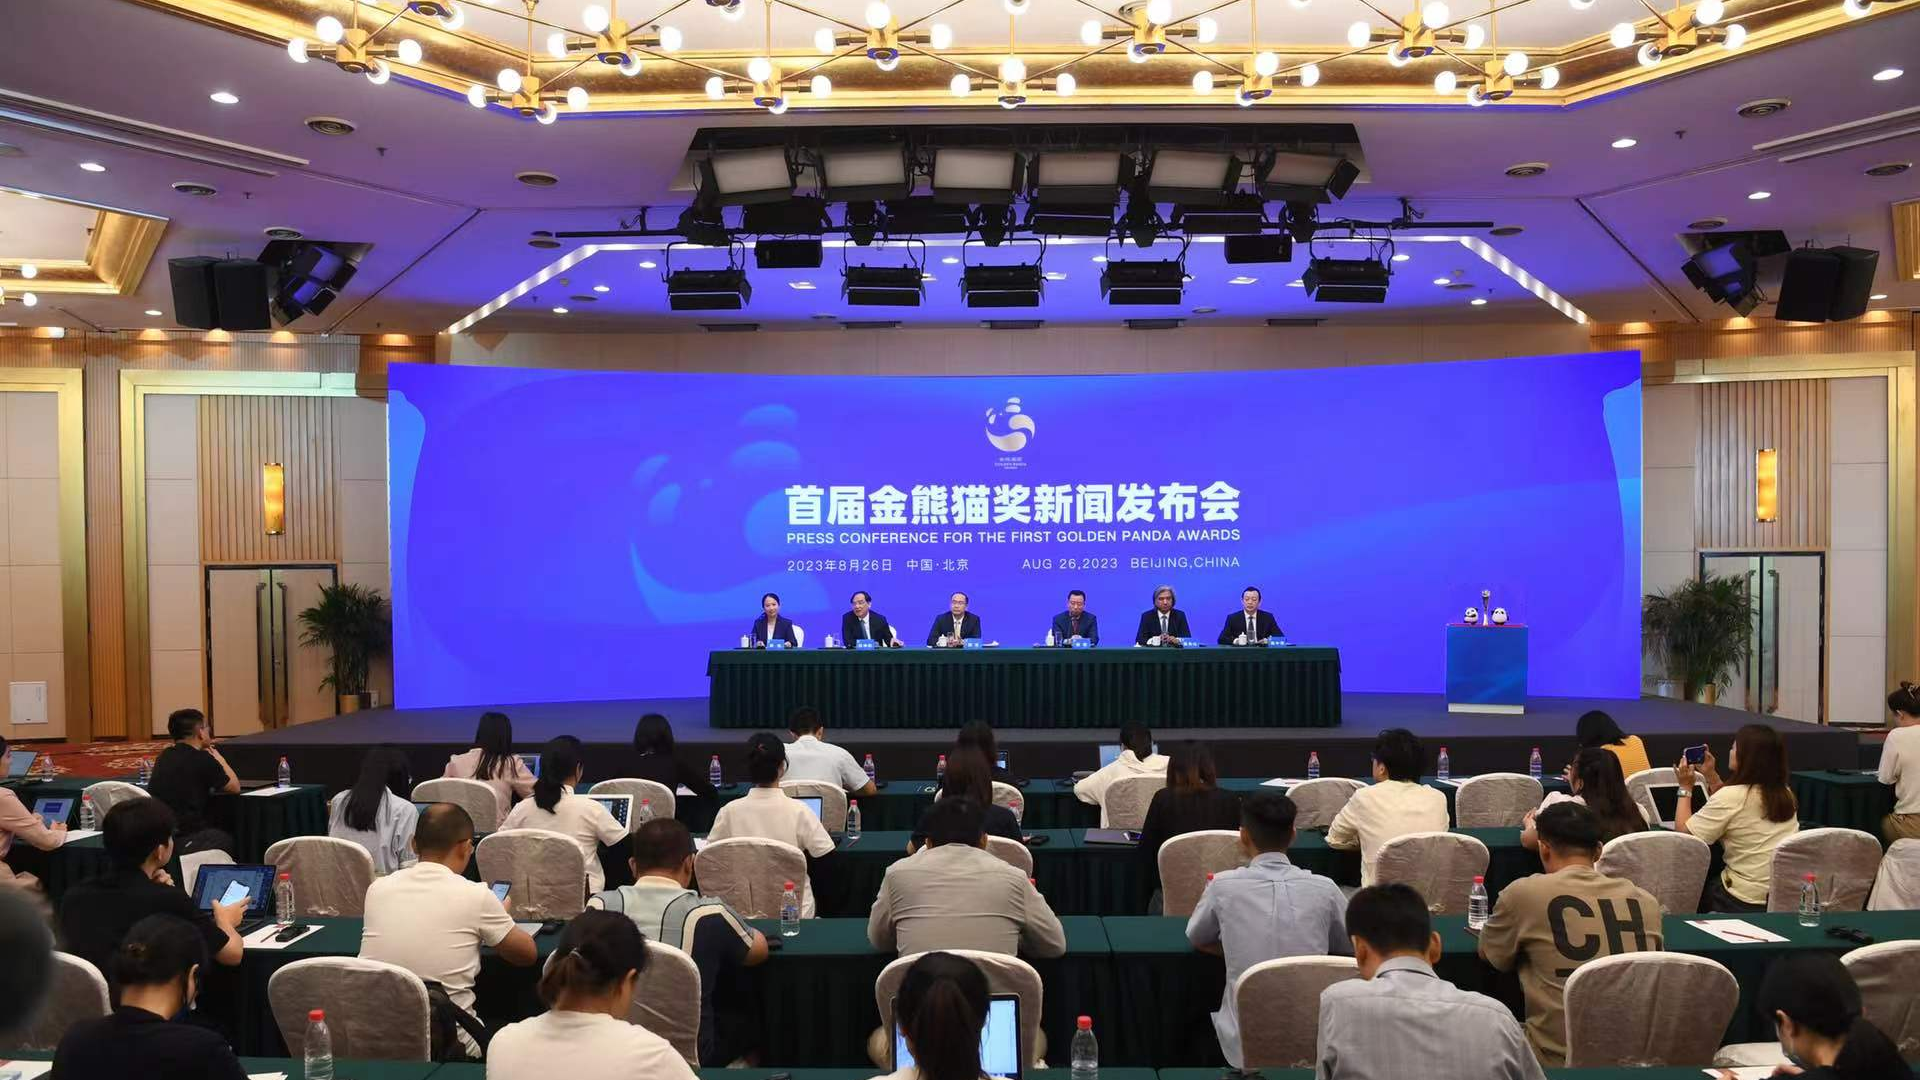 Press conference for the first Golden Panda Awards, Beijing, China, August 26, 2023. /CGTN